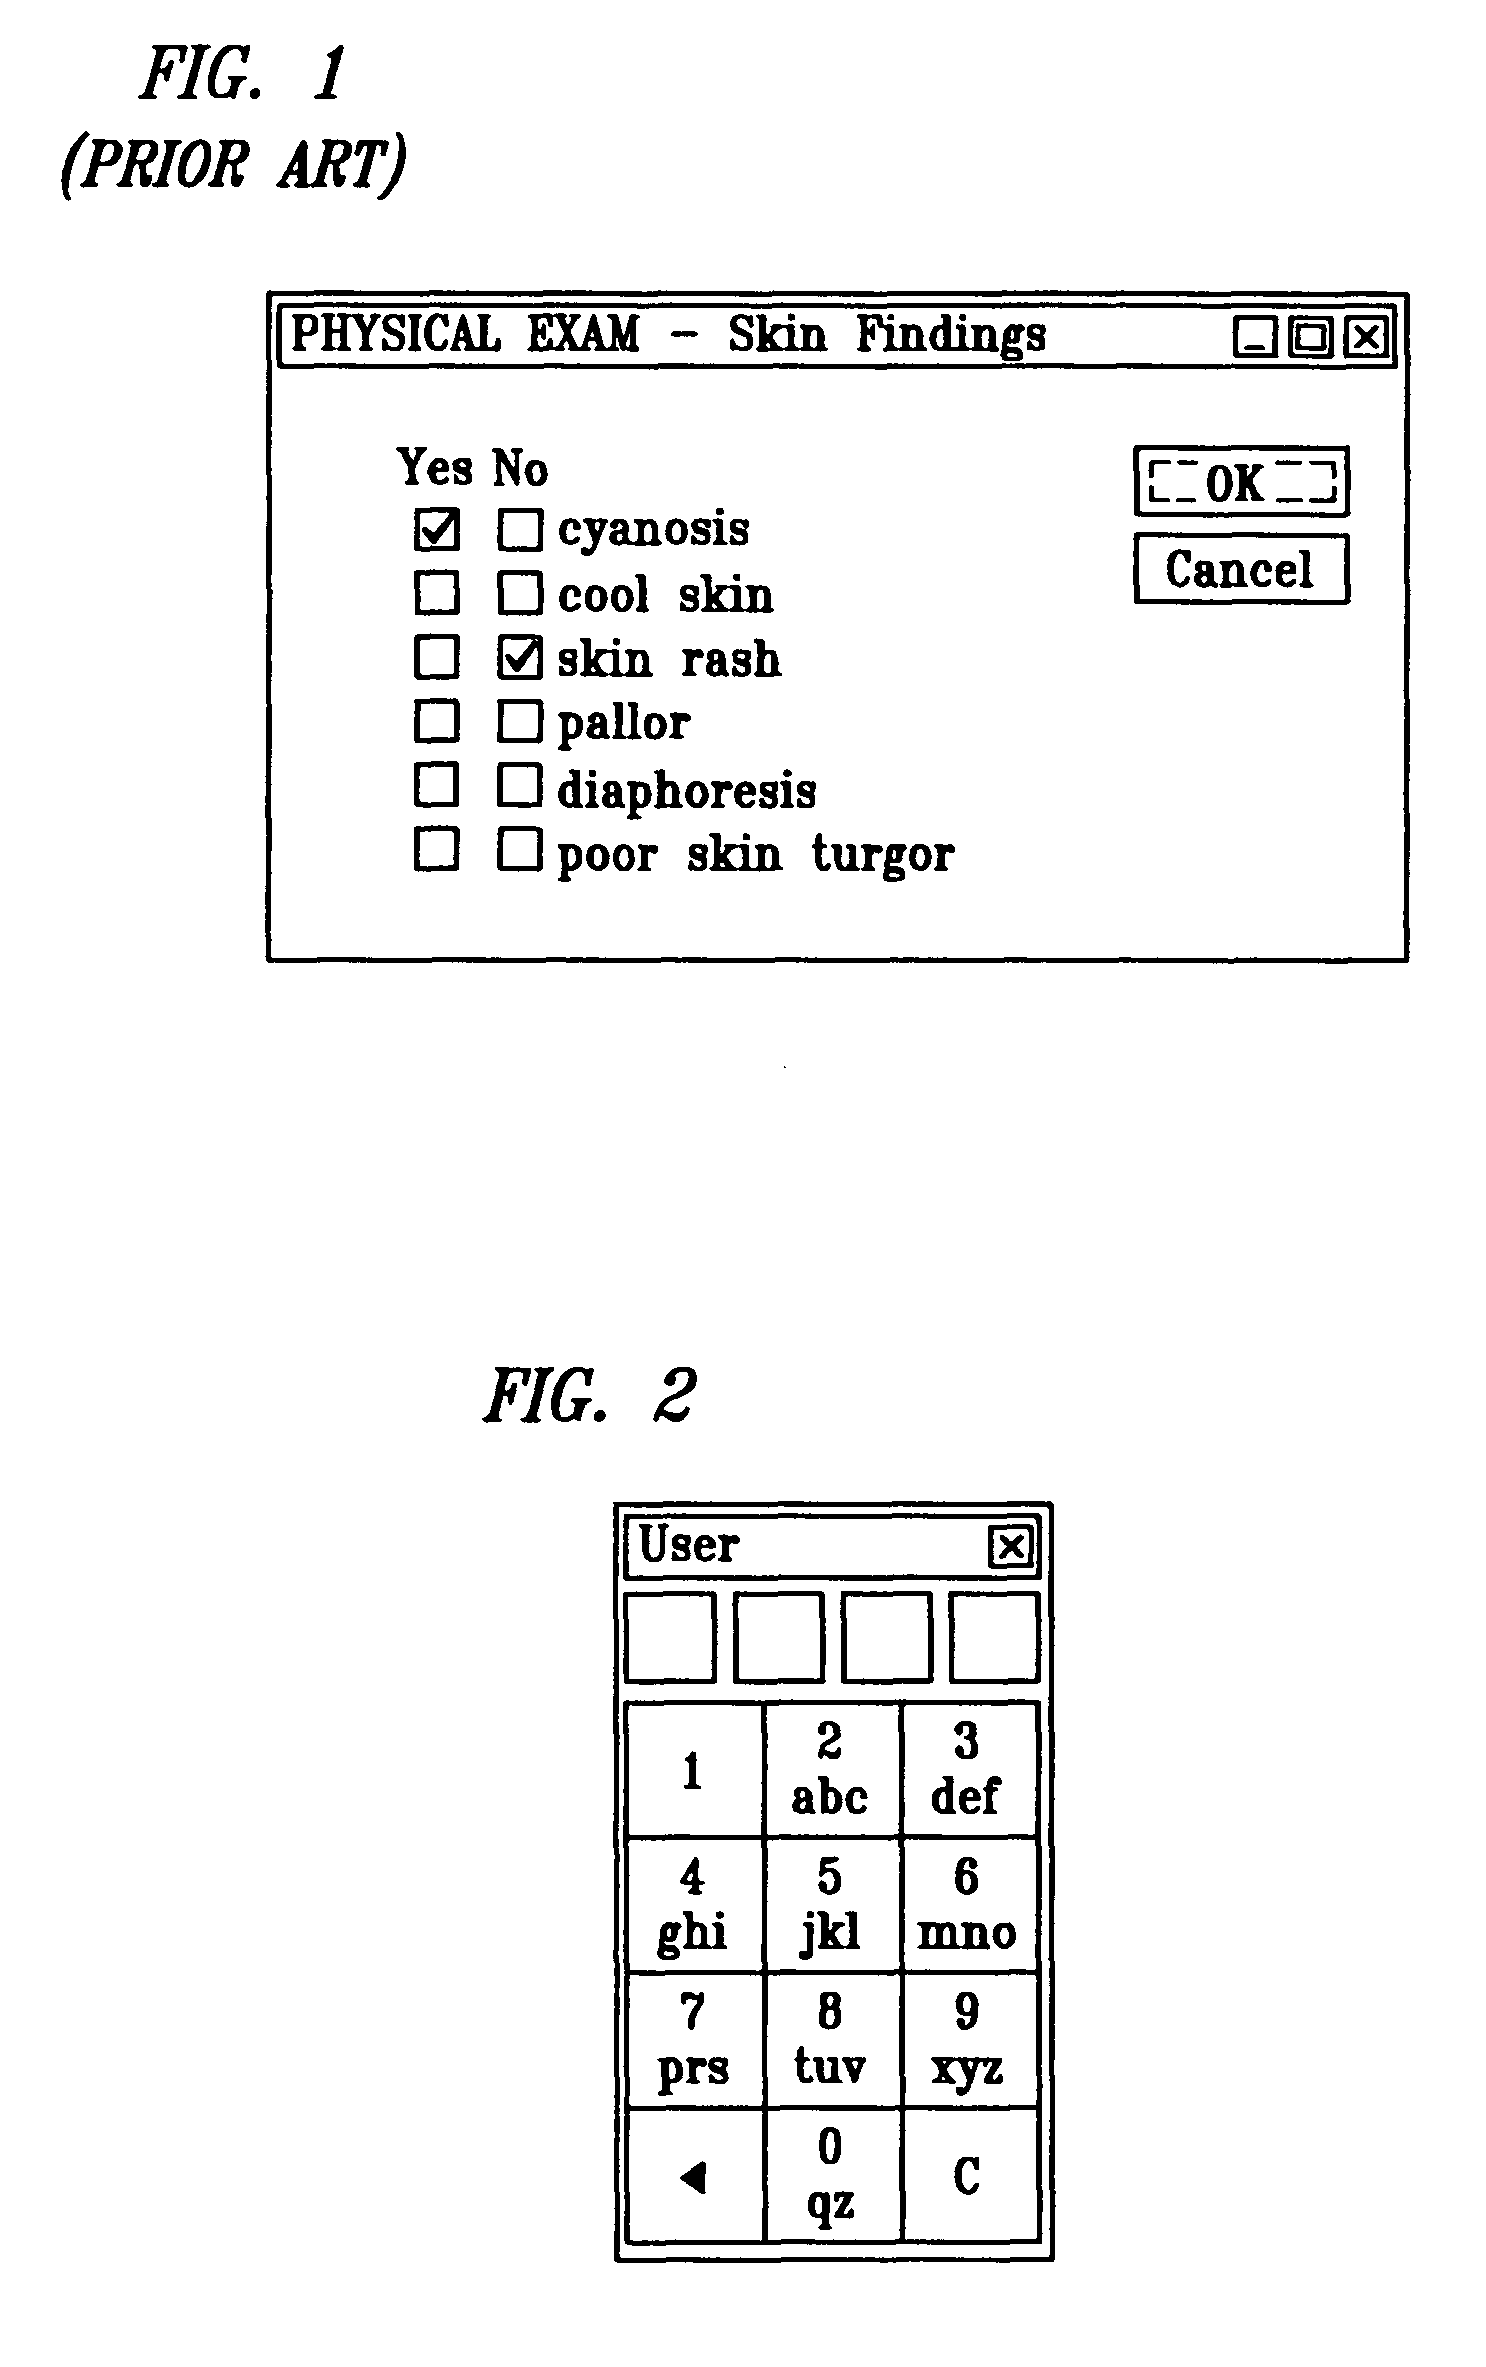 Method for entering, recording, distributing and reporting data